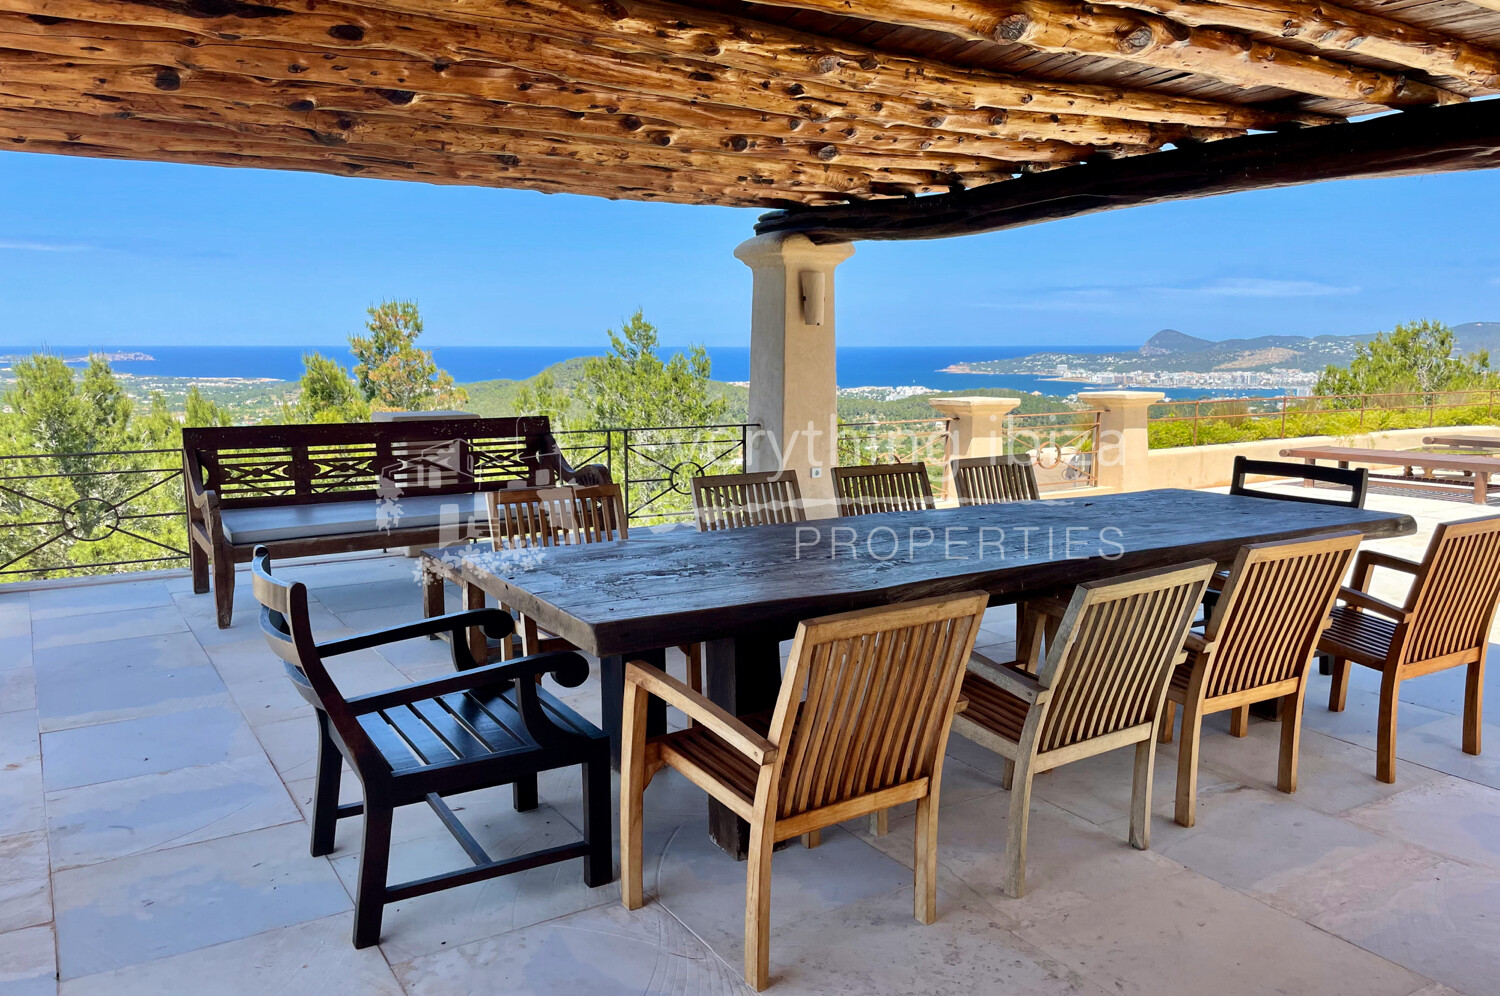 Magnificent Villa with Tourist License and Stunning Sea & Sunset Views, ref. 1547, for sale in Ibiza by everything ibiza Properties